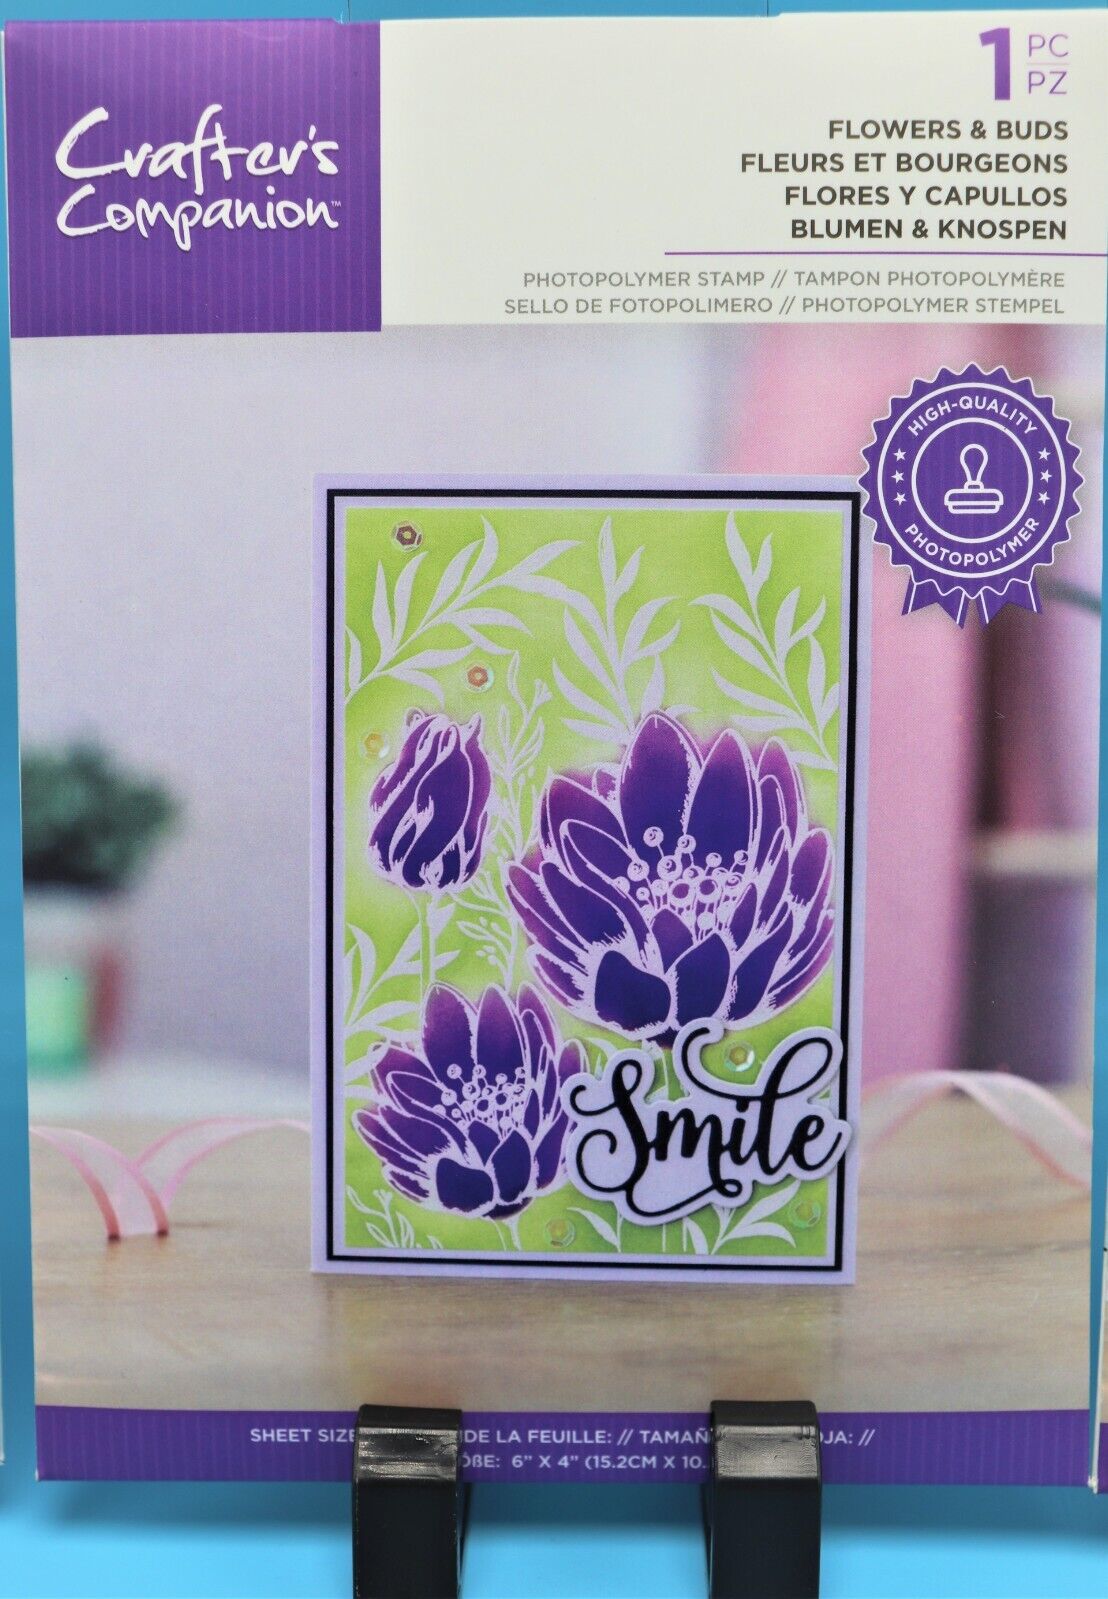 NEW Crafter's Companion Resist Silhouette Photopolymer Stamp Collection Crafter's Companion - фотография #4